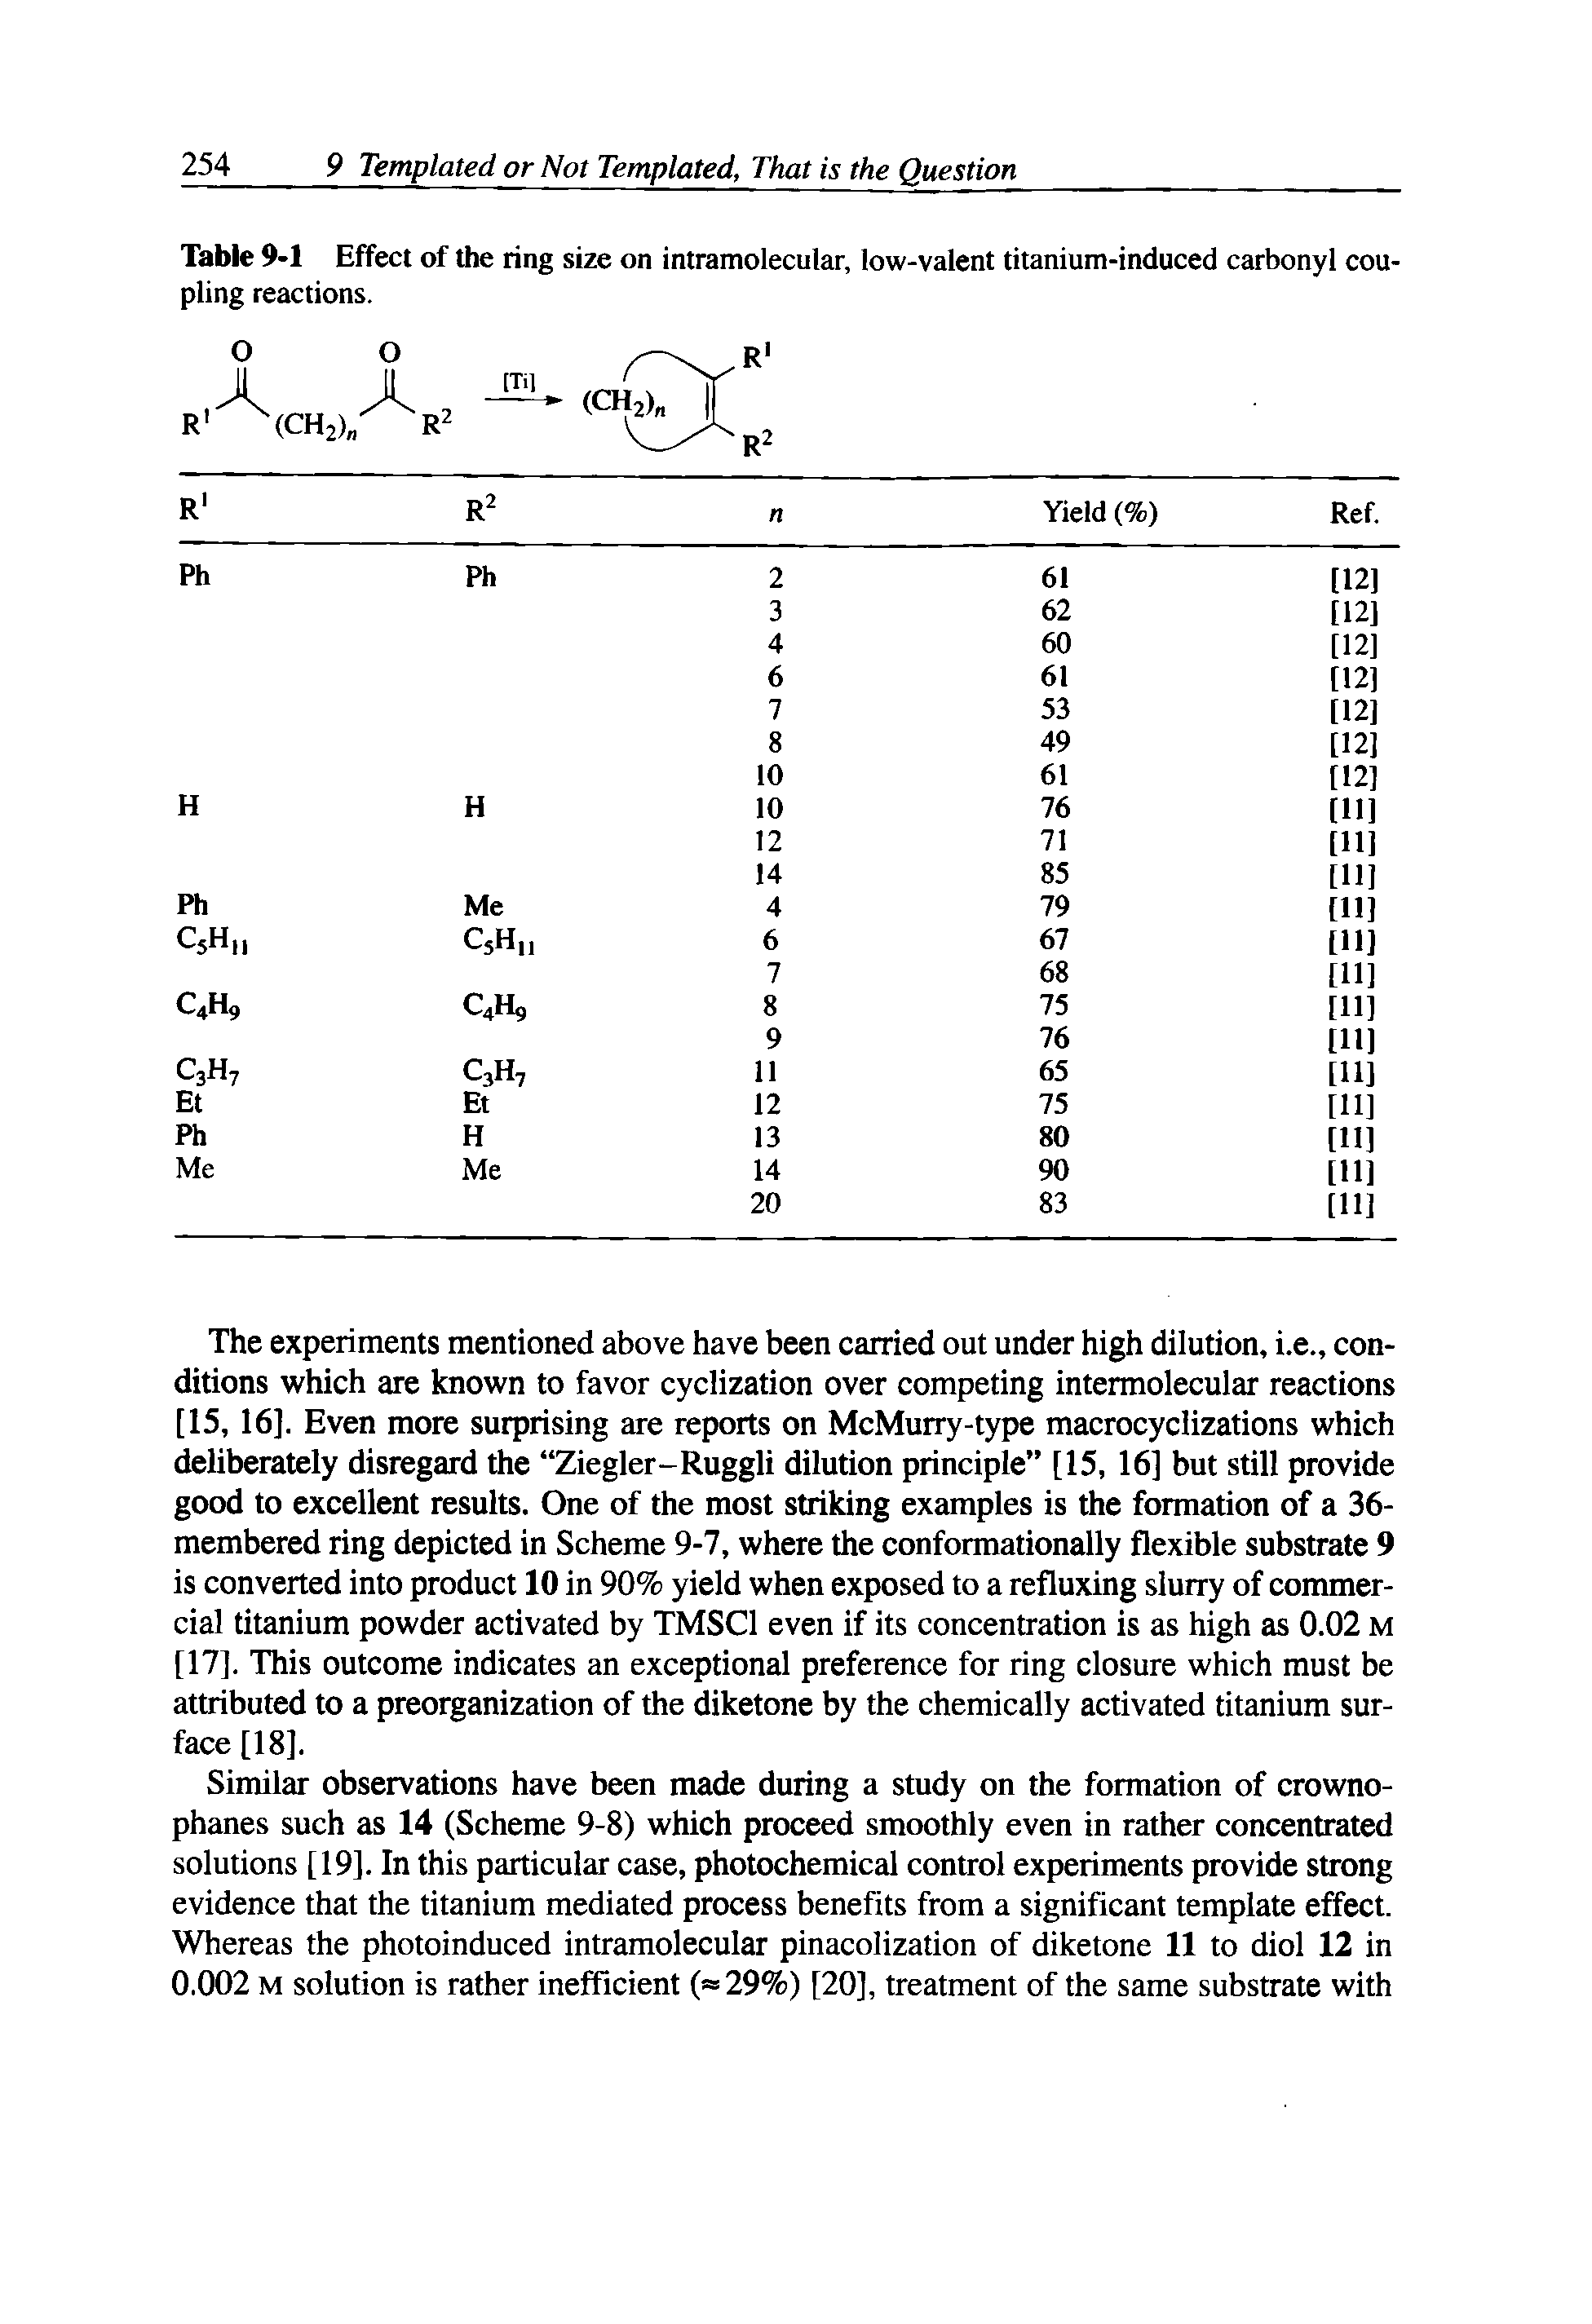 Table 9-1 Effect of the ring size on intramolecular, low-valent titanium-induced carbonyl coupling reactions.